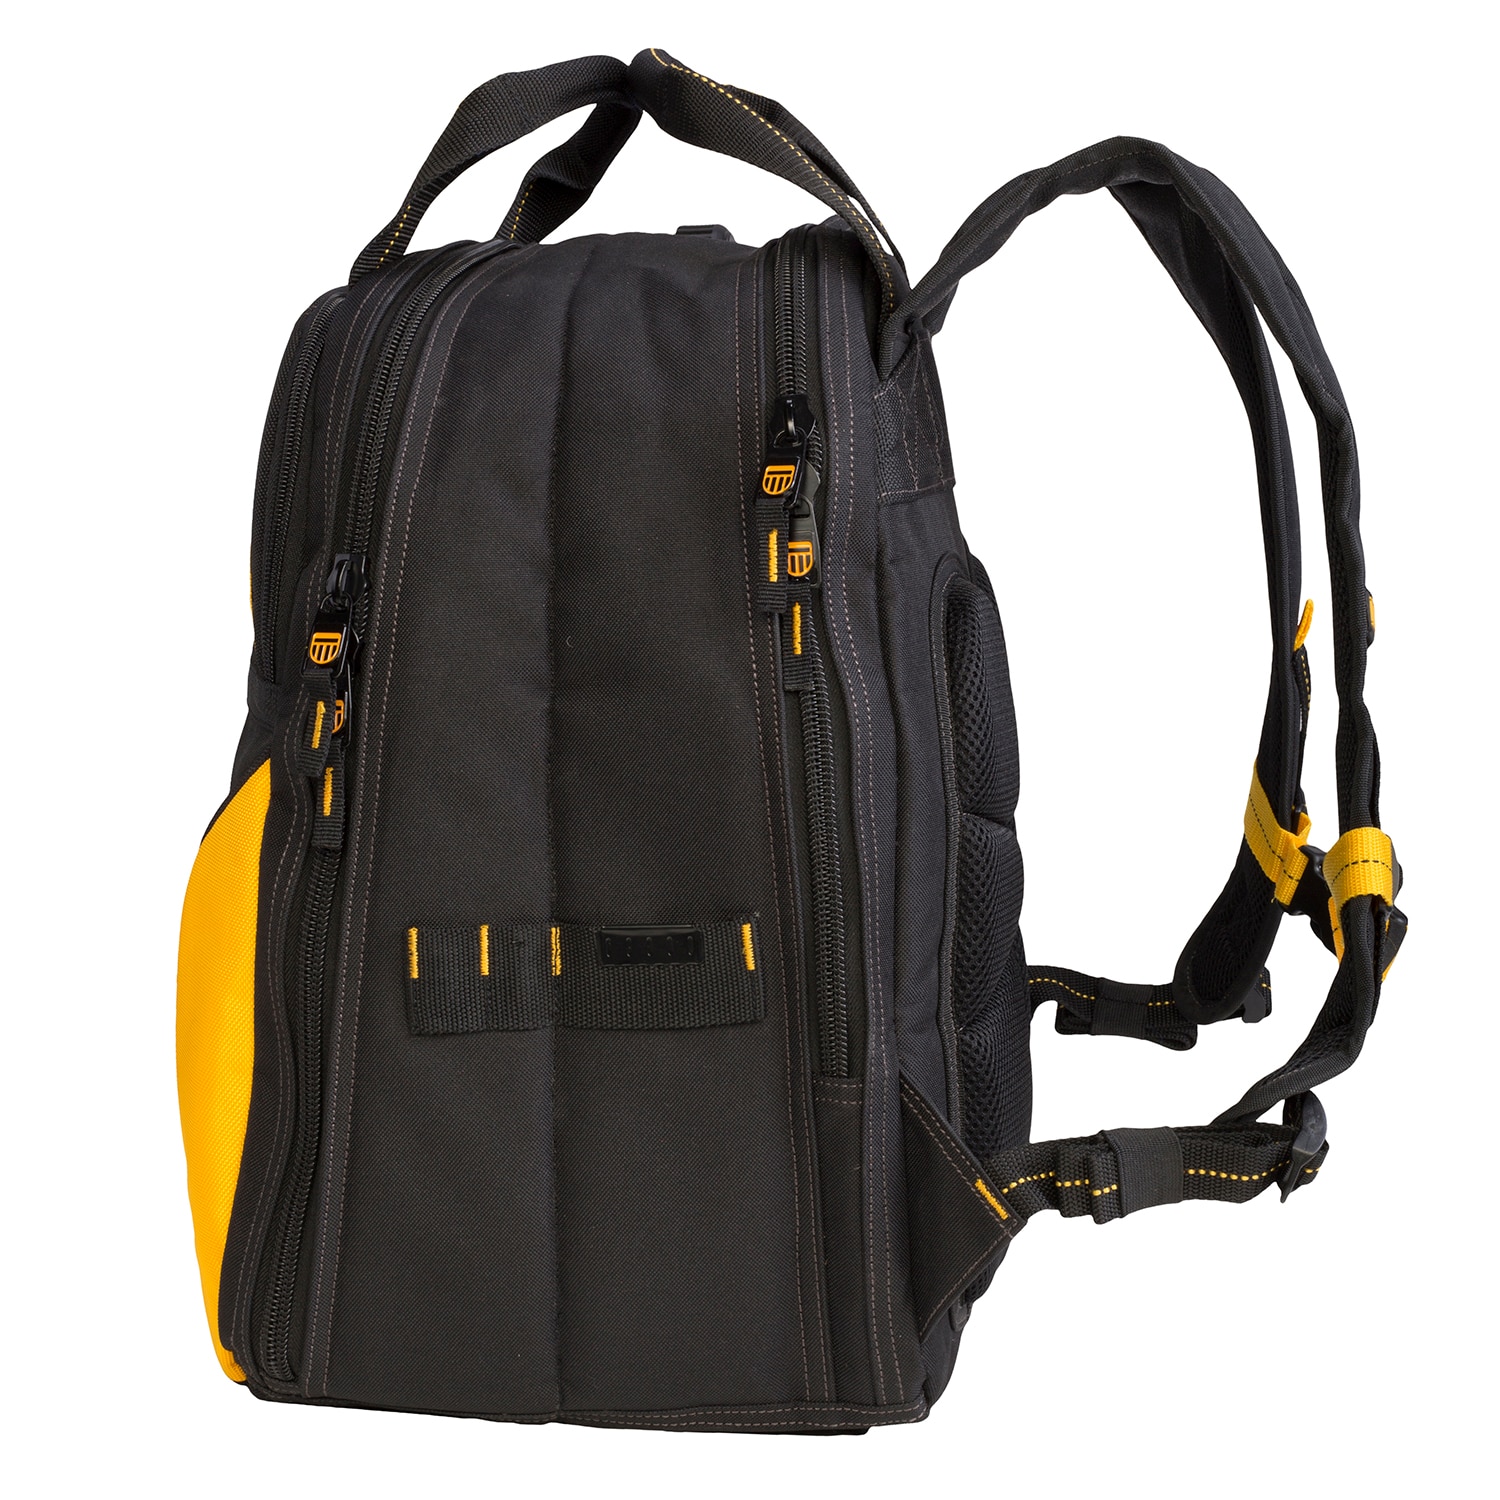 DEWALT Black/Yellow Polyester 6-in Zippered Backpack at Lowes.com